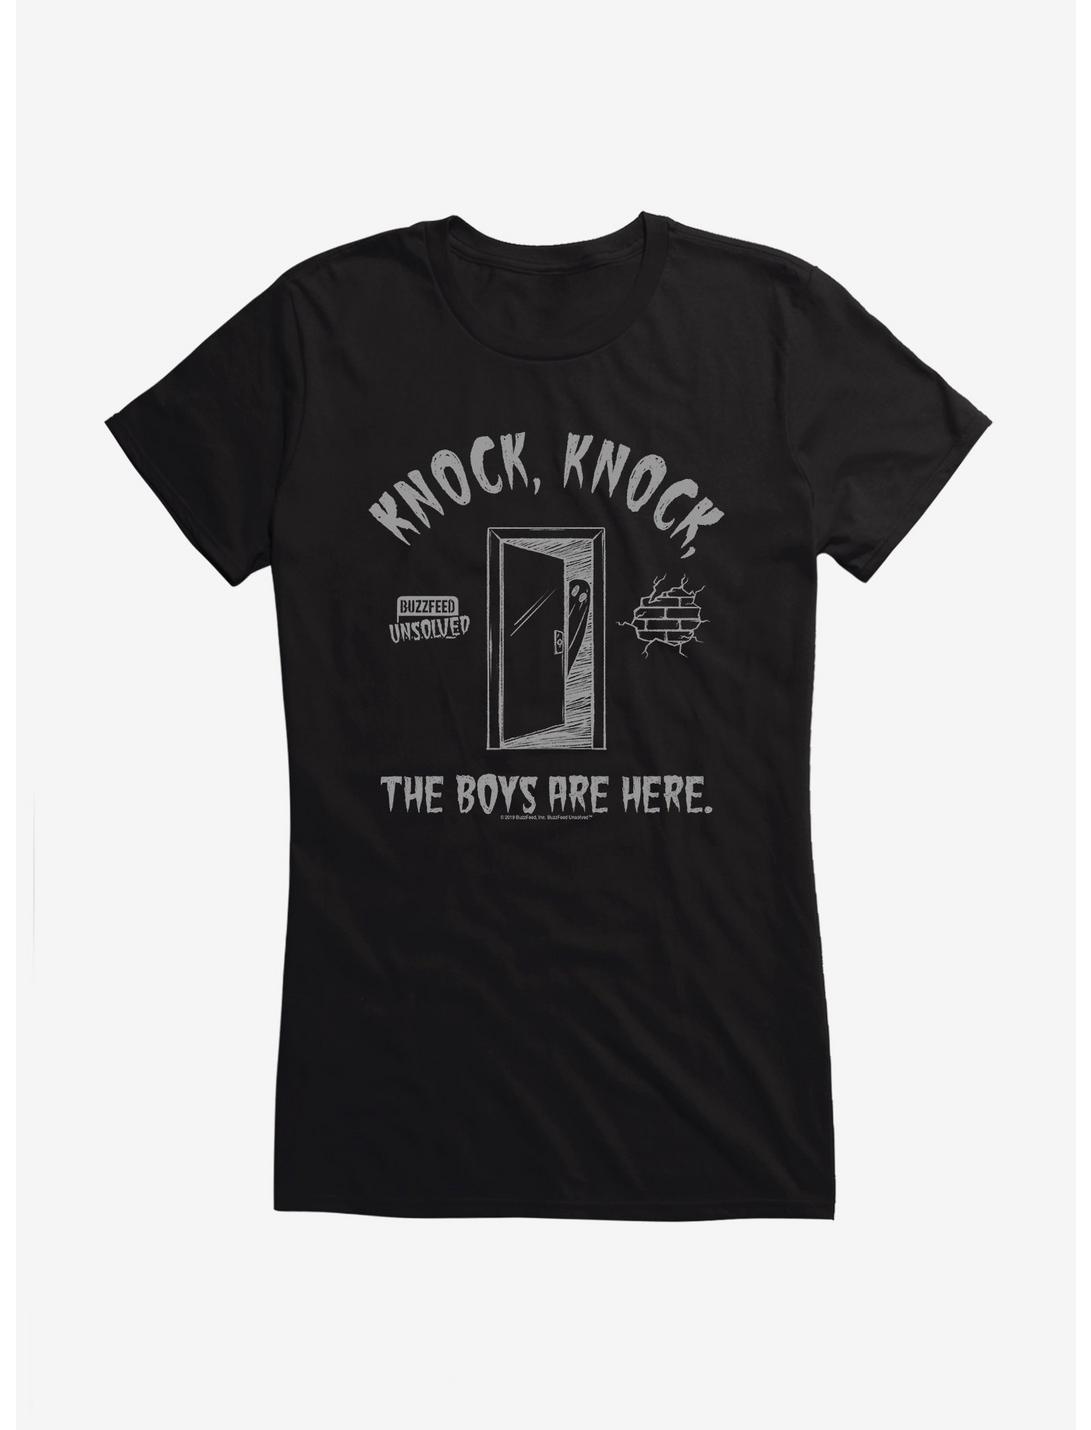 Buzzfeed's Unsolved Knock, Knock Girls T-Shirt, , hi-res